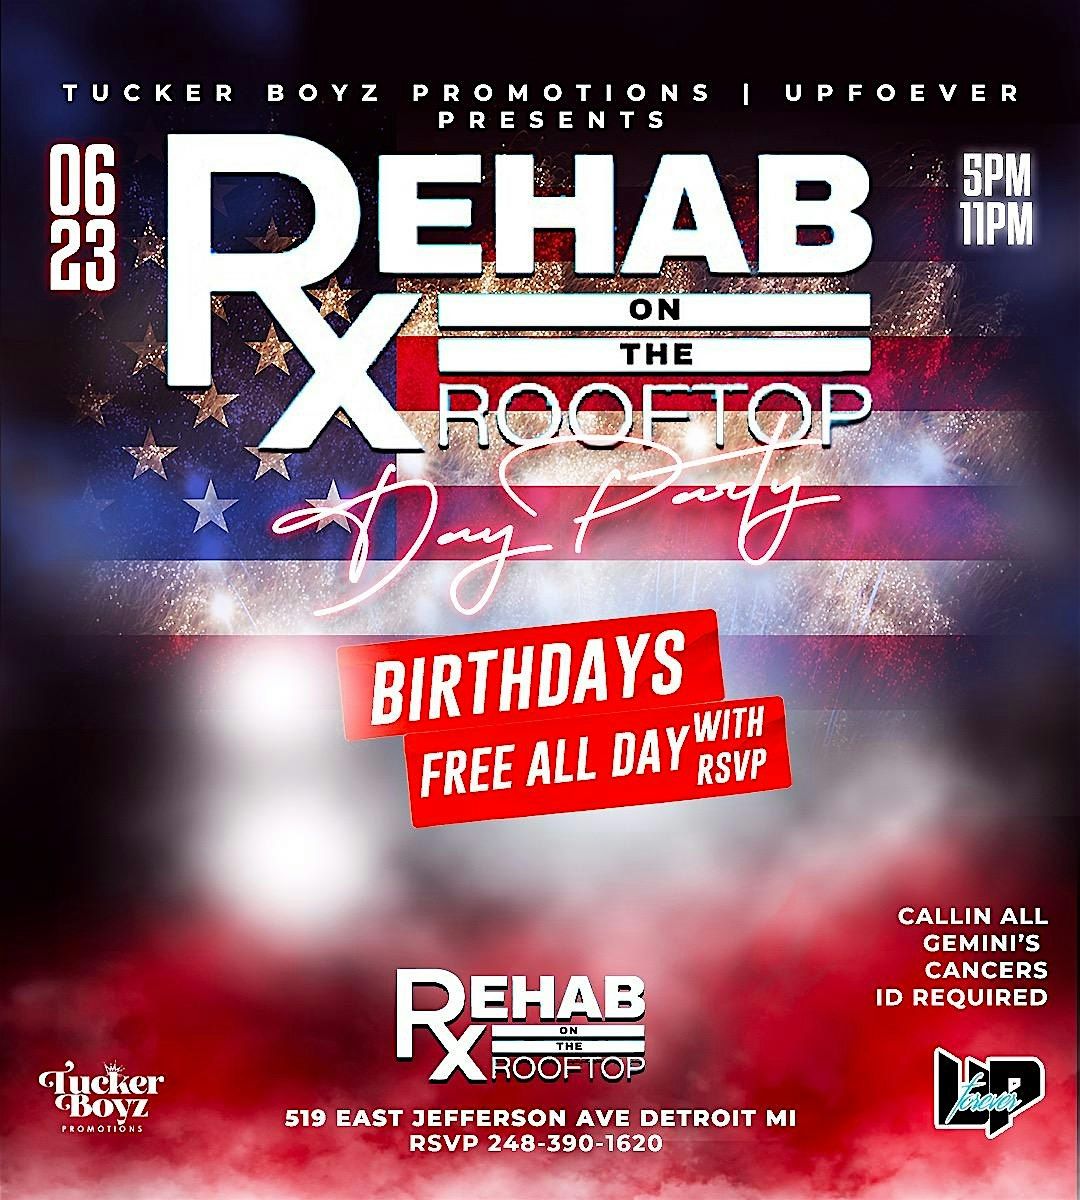 ReHab on the Roof Top Day Party